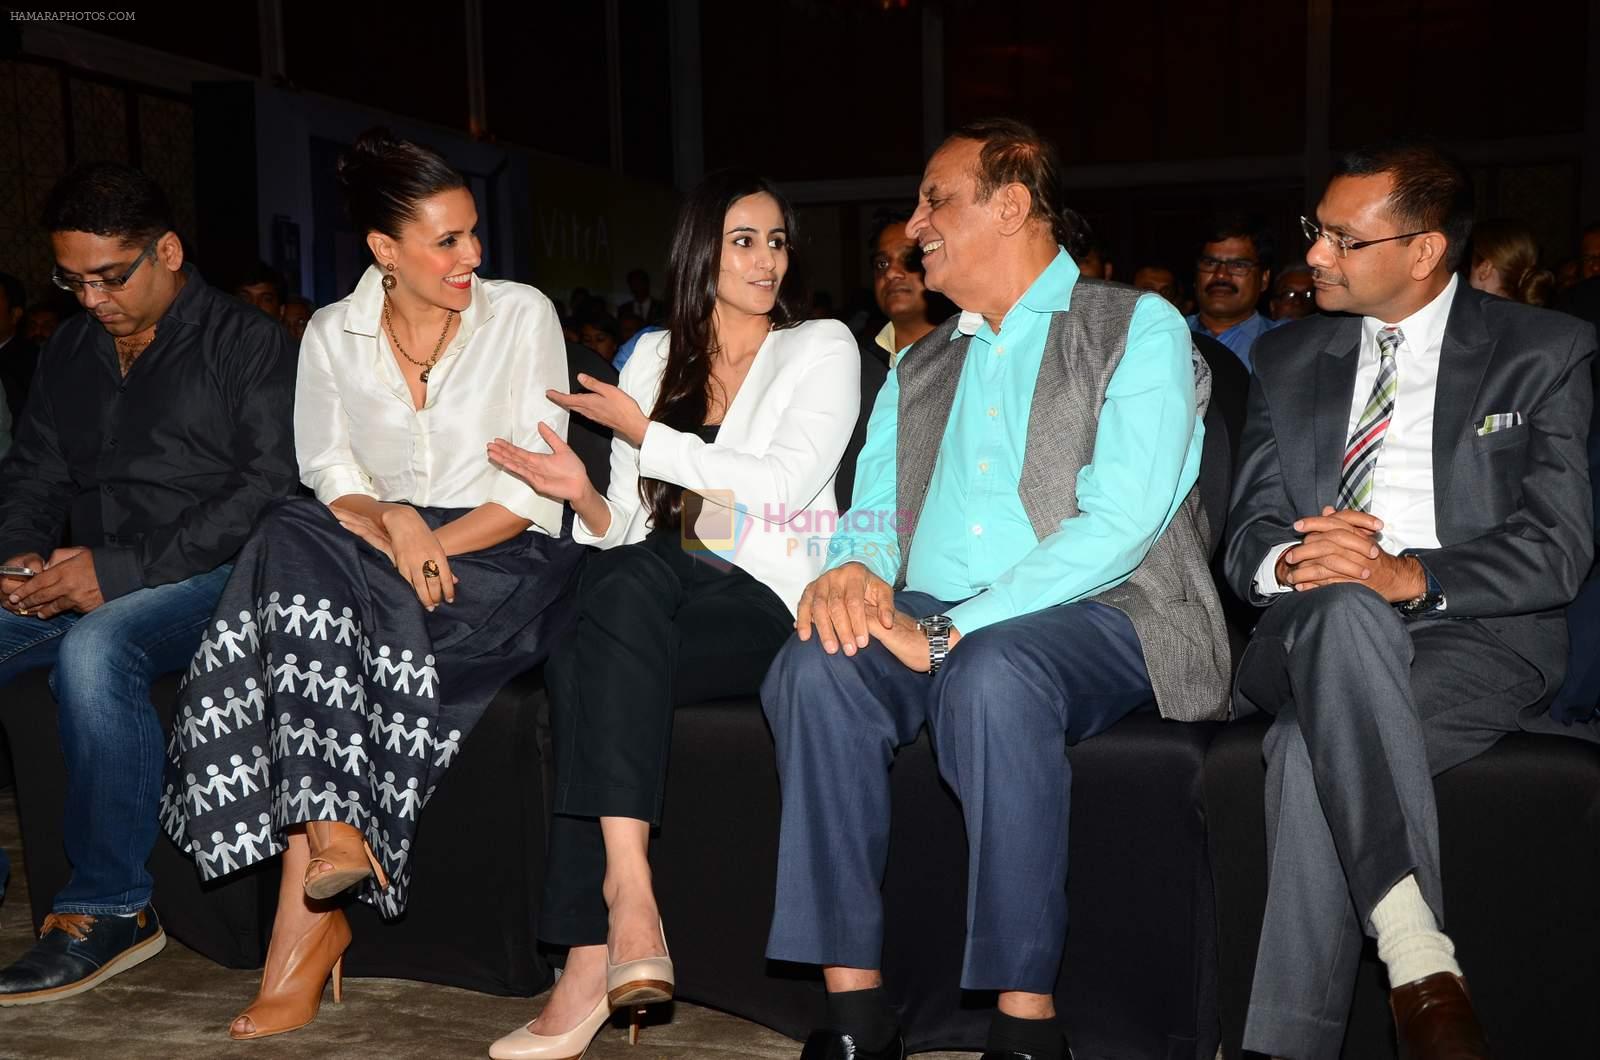 Neha Dhupia at Trend Excellence event in association with Vitra in Four Seasons on 10th Sept 2015